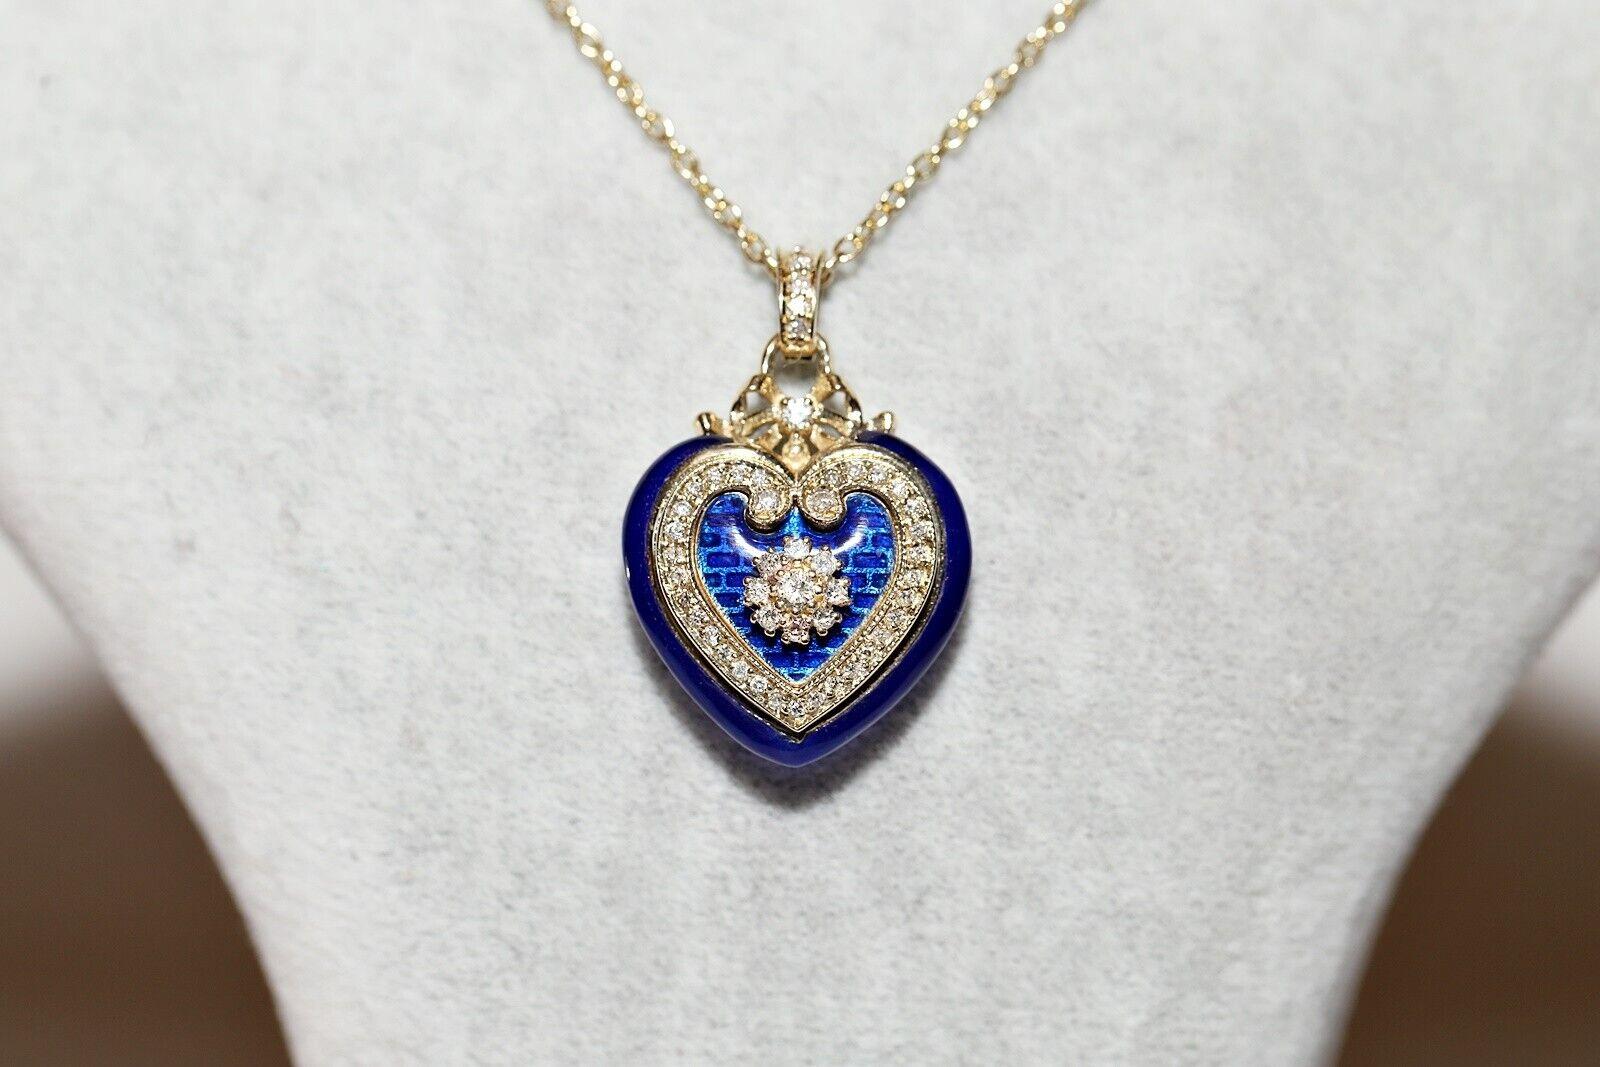 New Made 14k Gold Natural Diamond And Enamel Decorated Heart Pendant Necklace For Sale 8